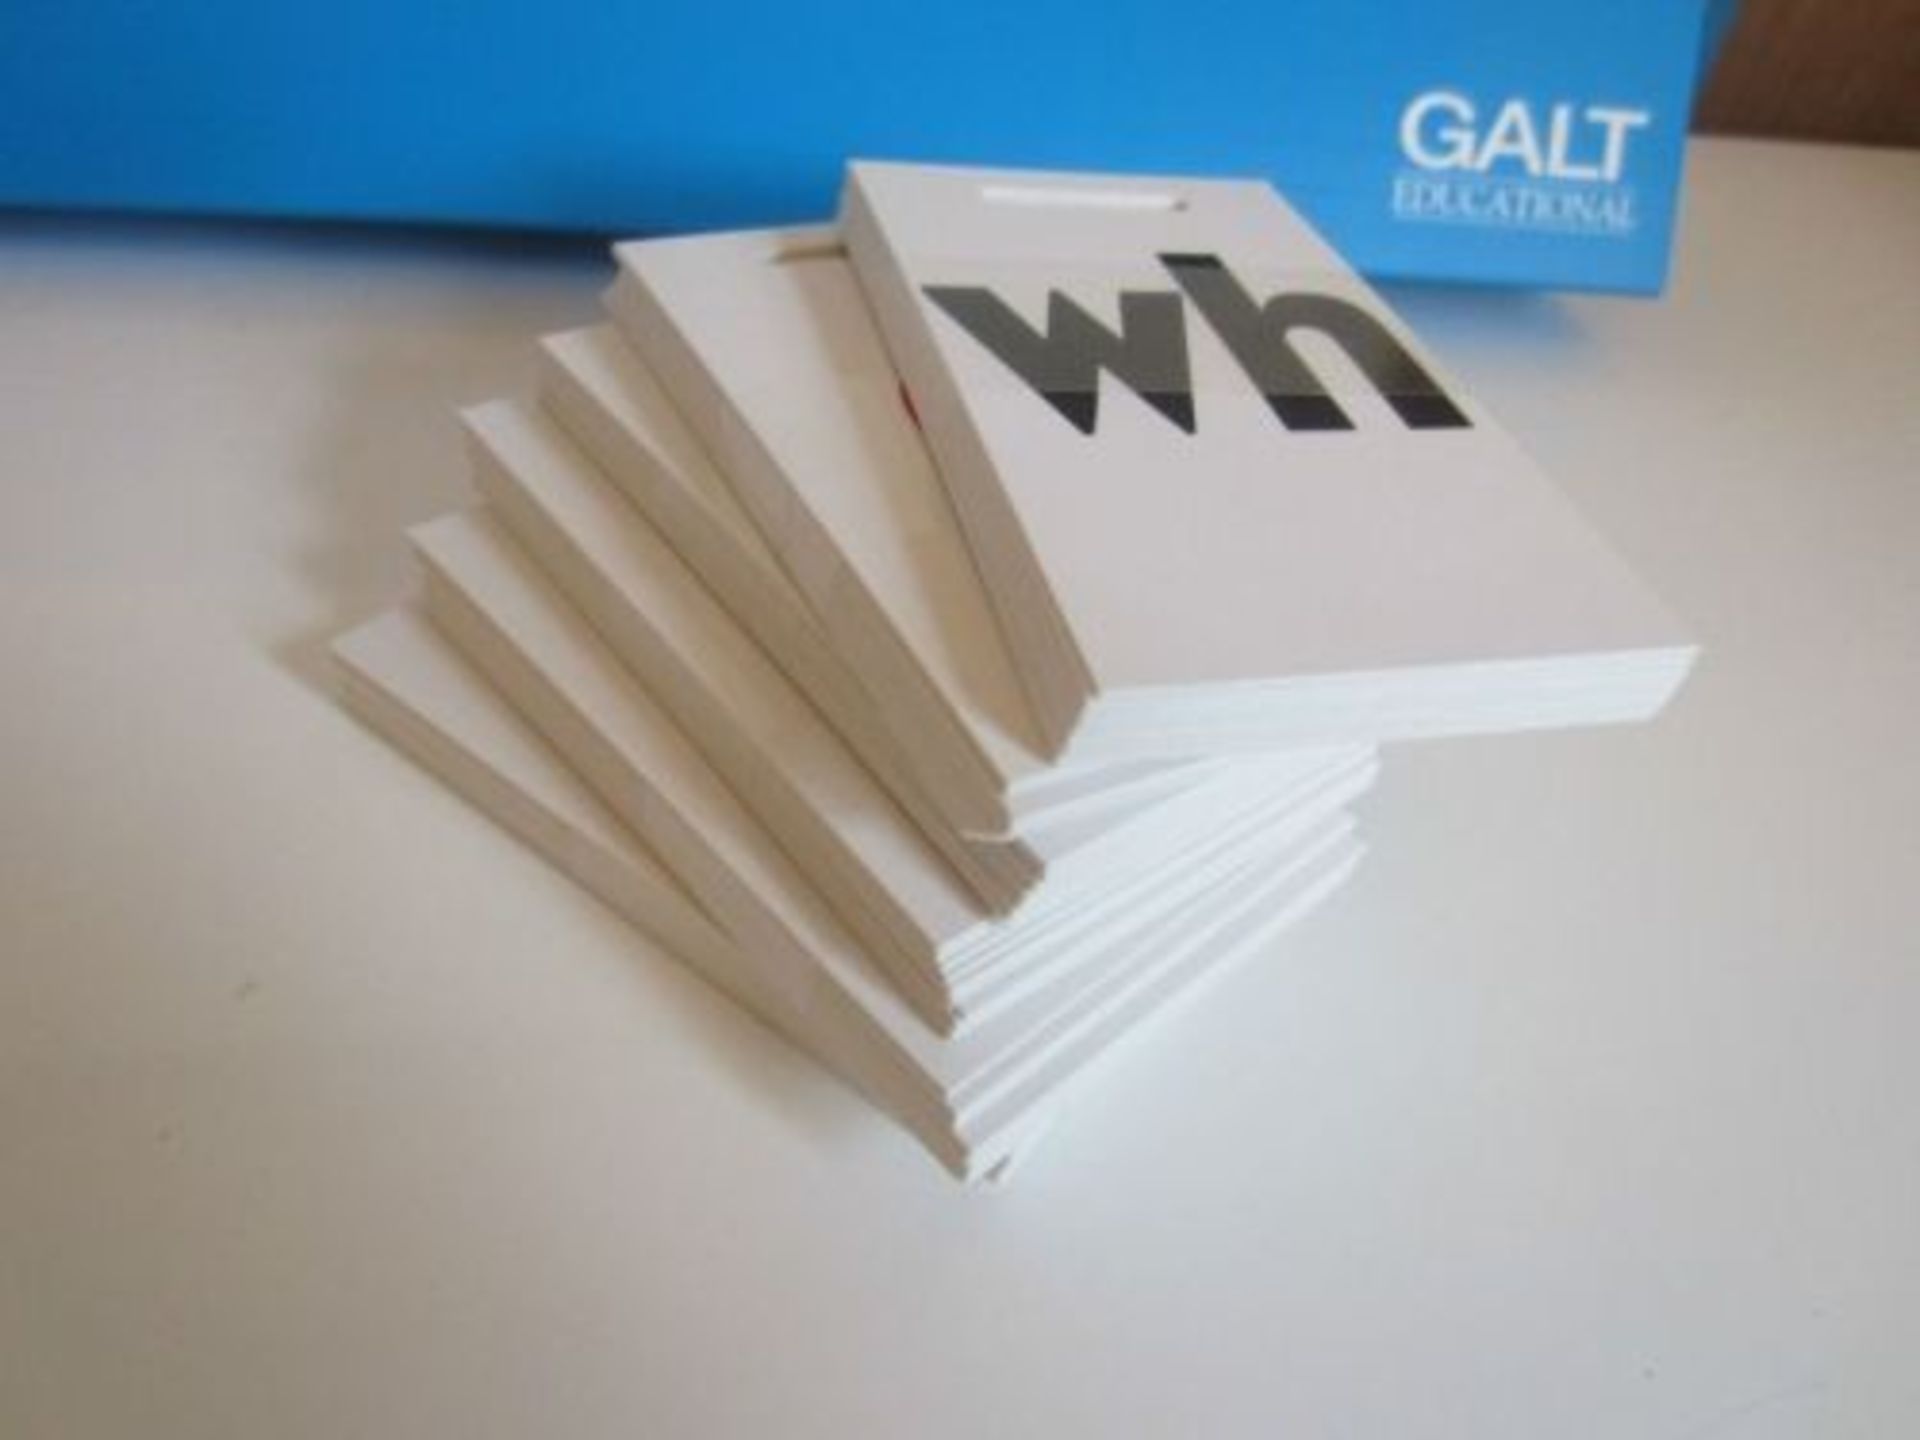 216 x Galt Educational WORDS FLIP CARDS With Stands - WORD BUILDER - For Educational Purposes - - Image 2 of 7